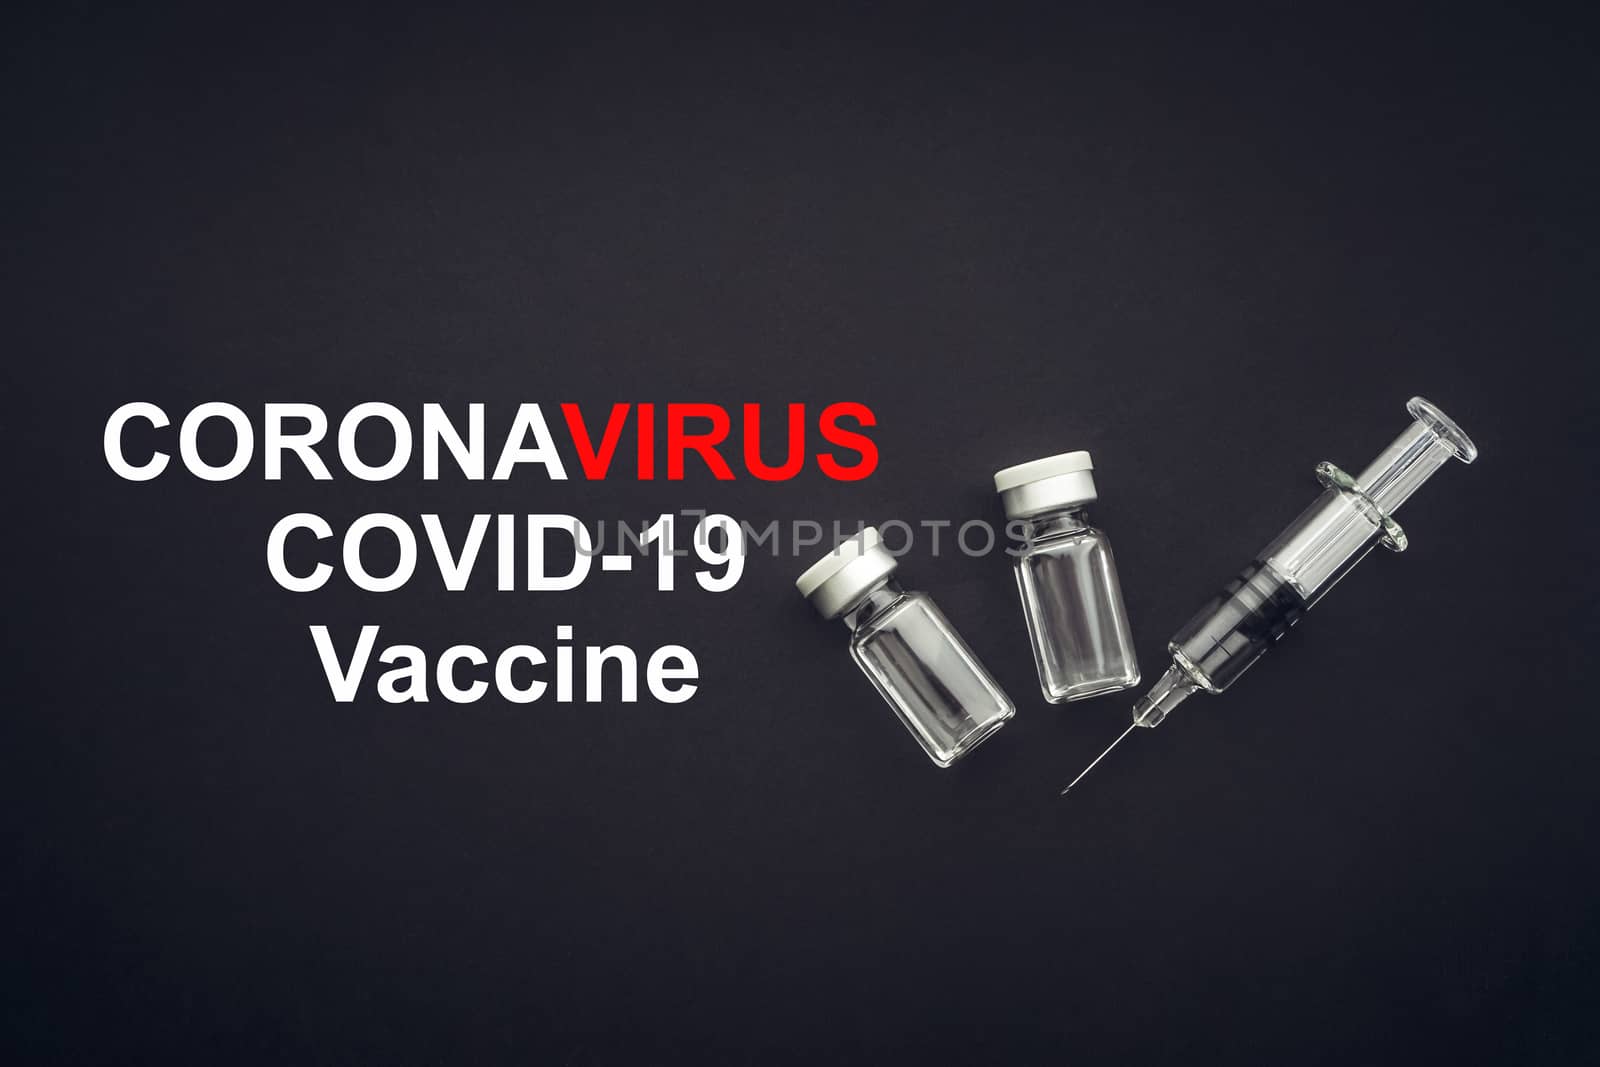 CORONAVIRUS COVID-19 VACCINE text with syringe and vials on black background by silverwings